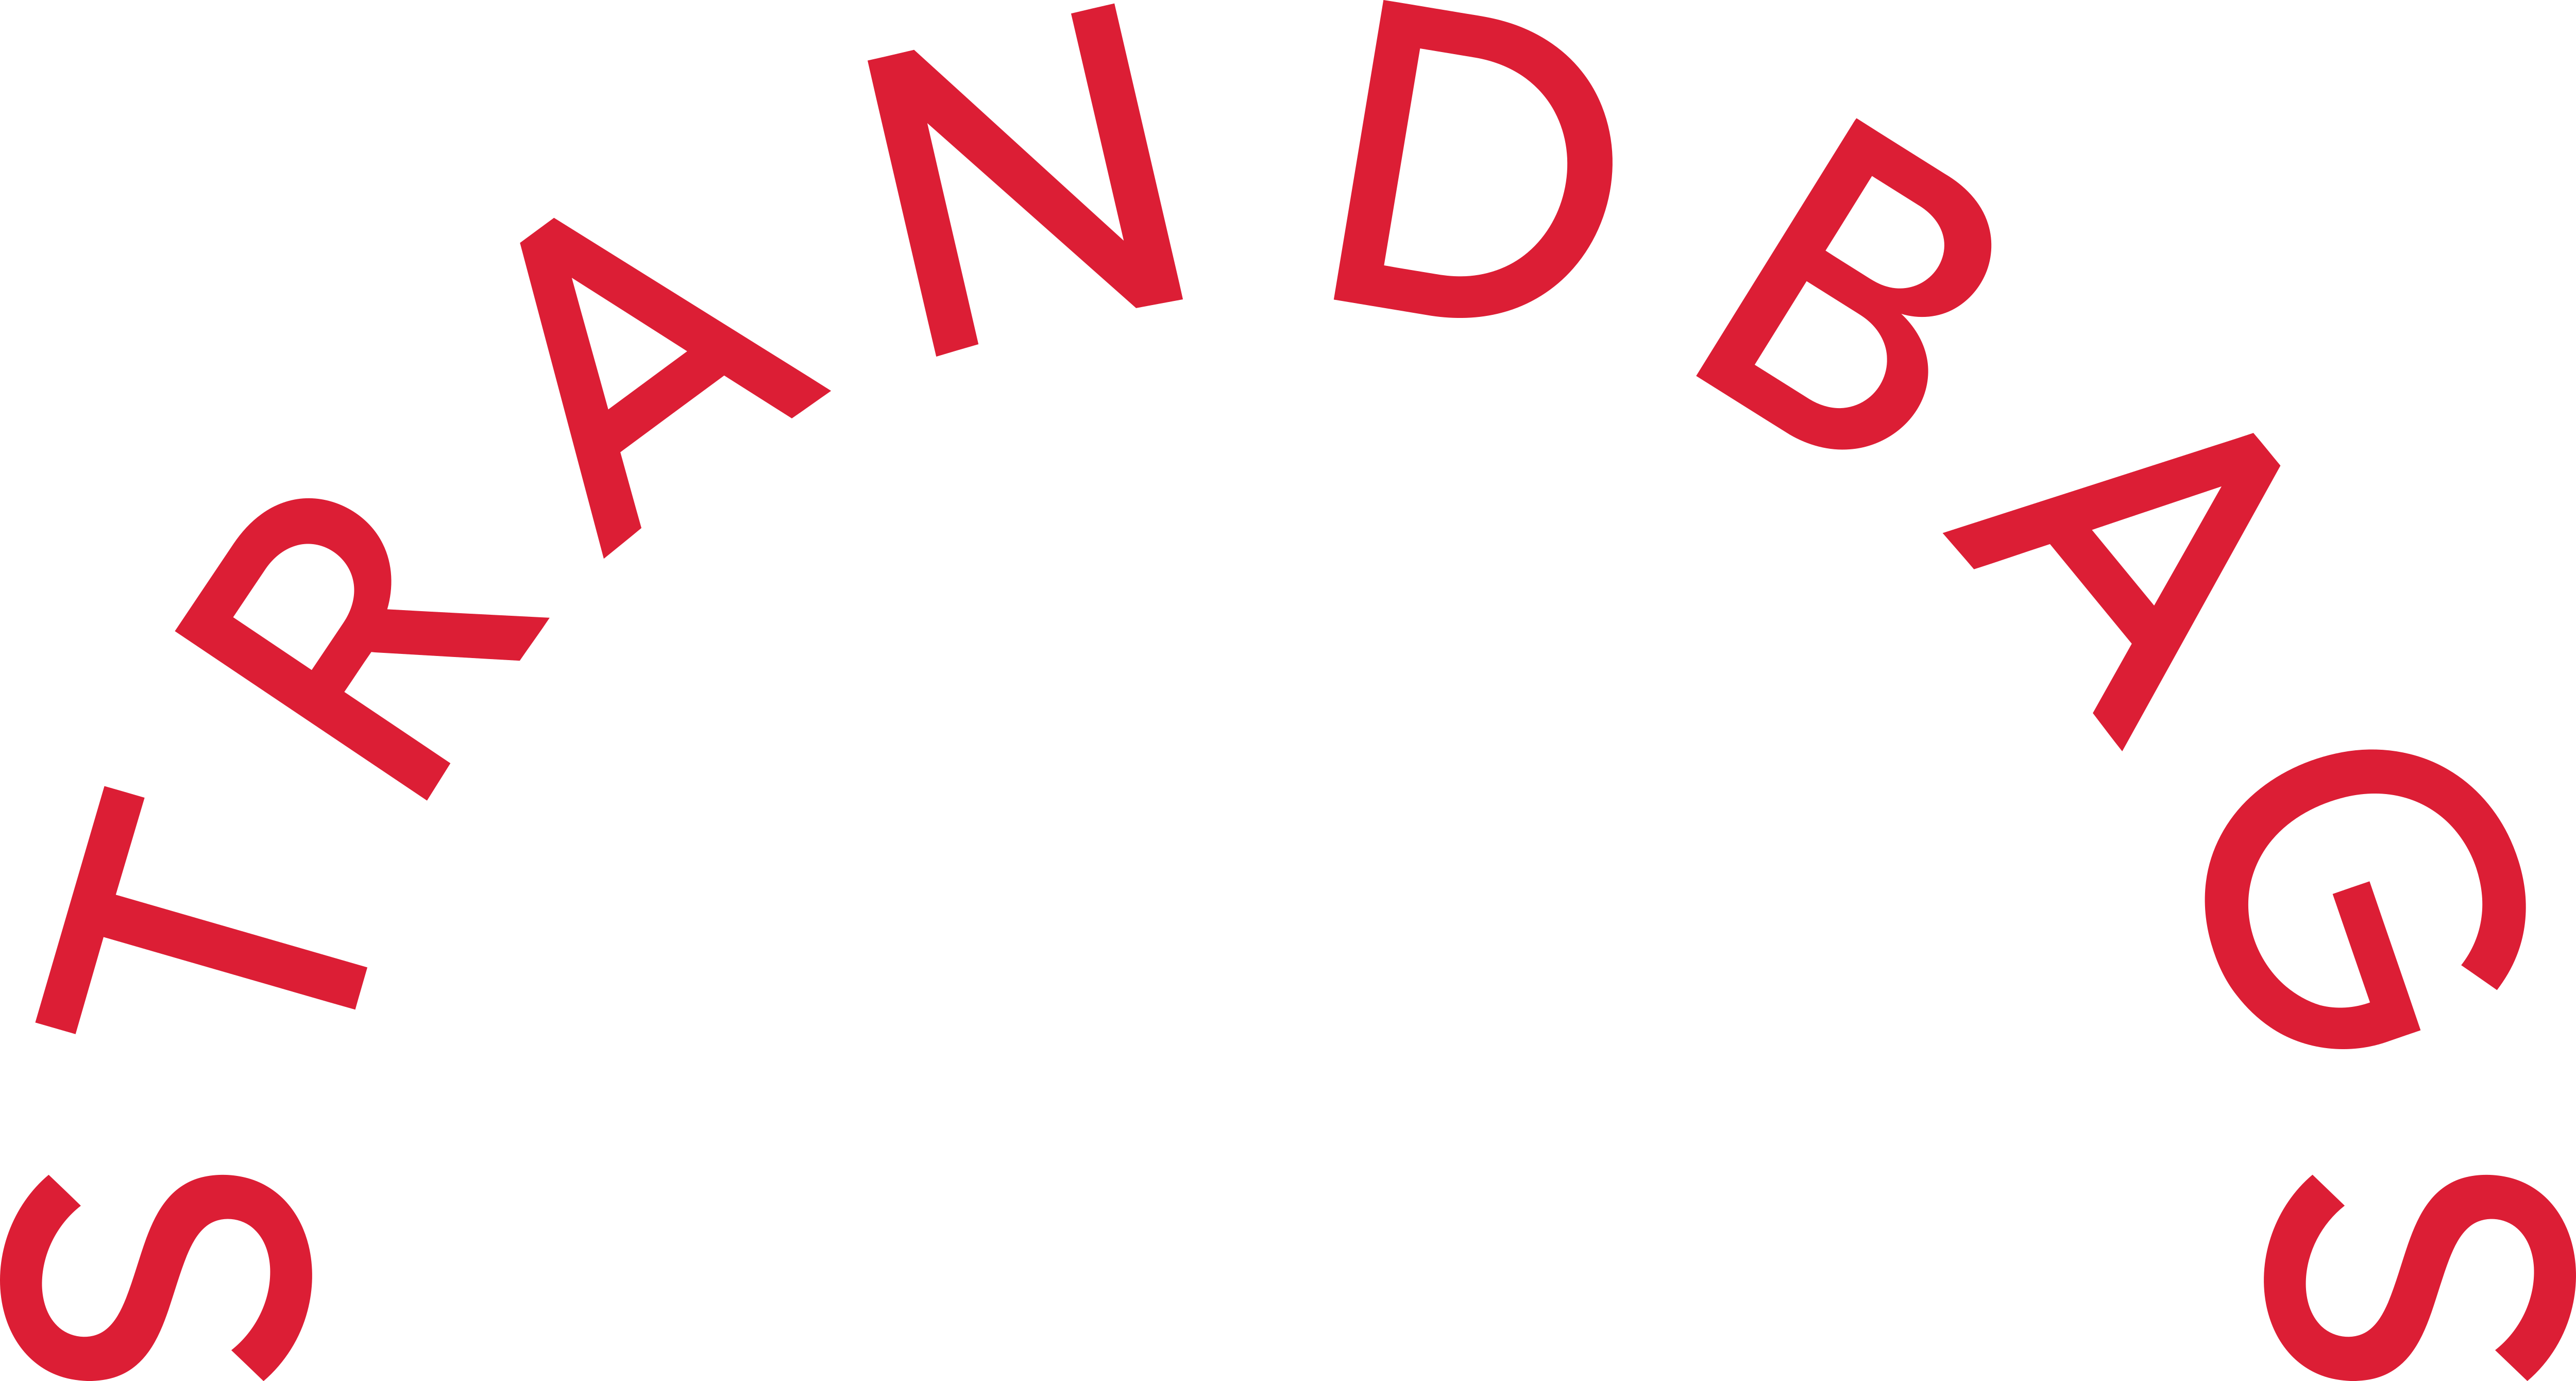 Hanes brands logo in red and purple